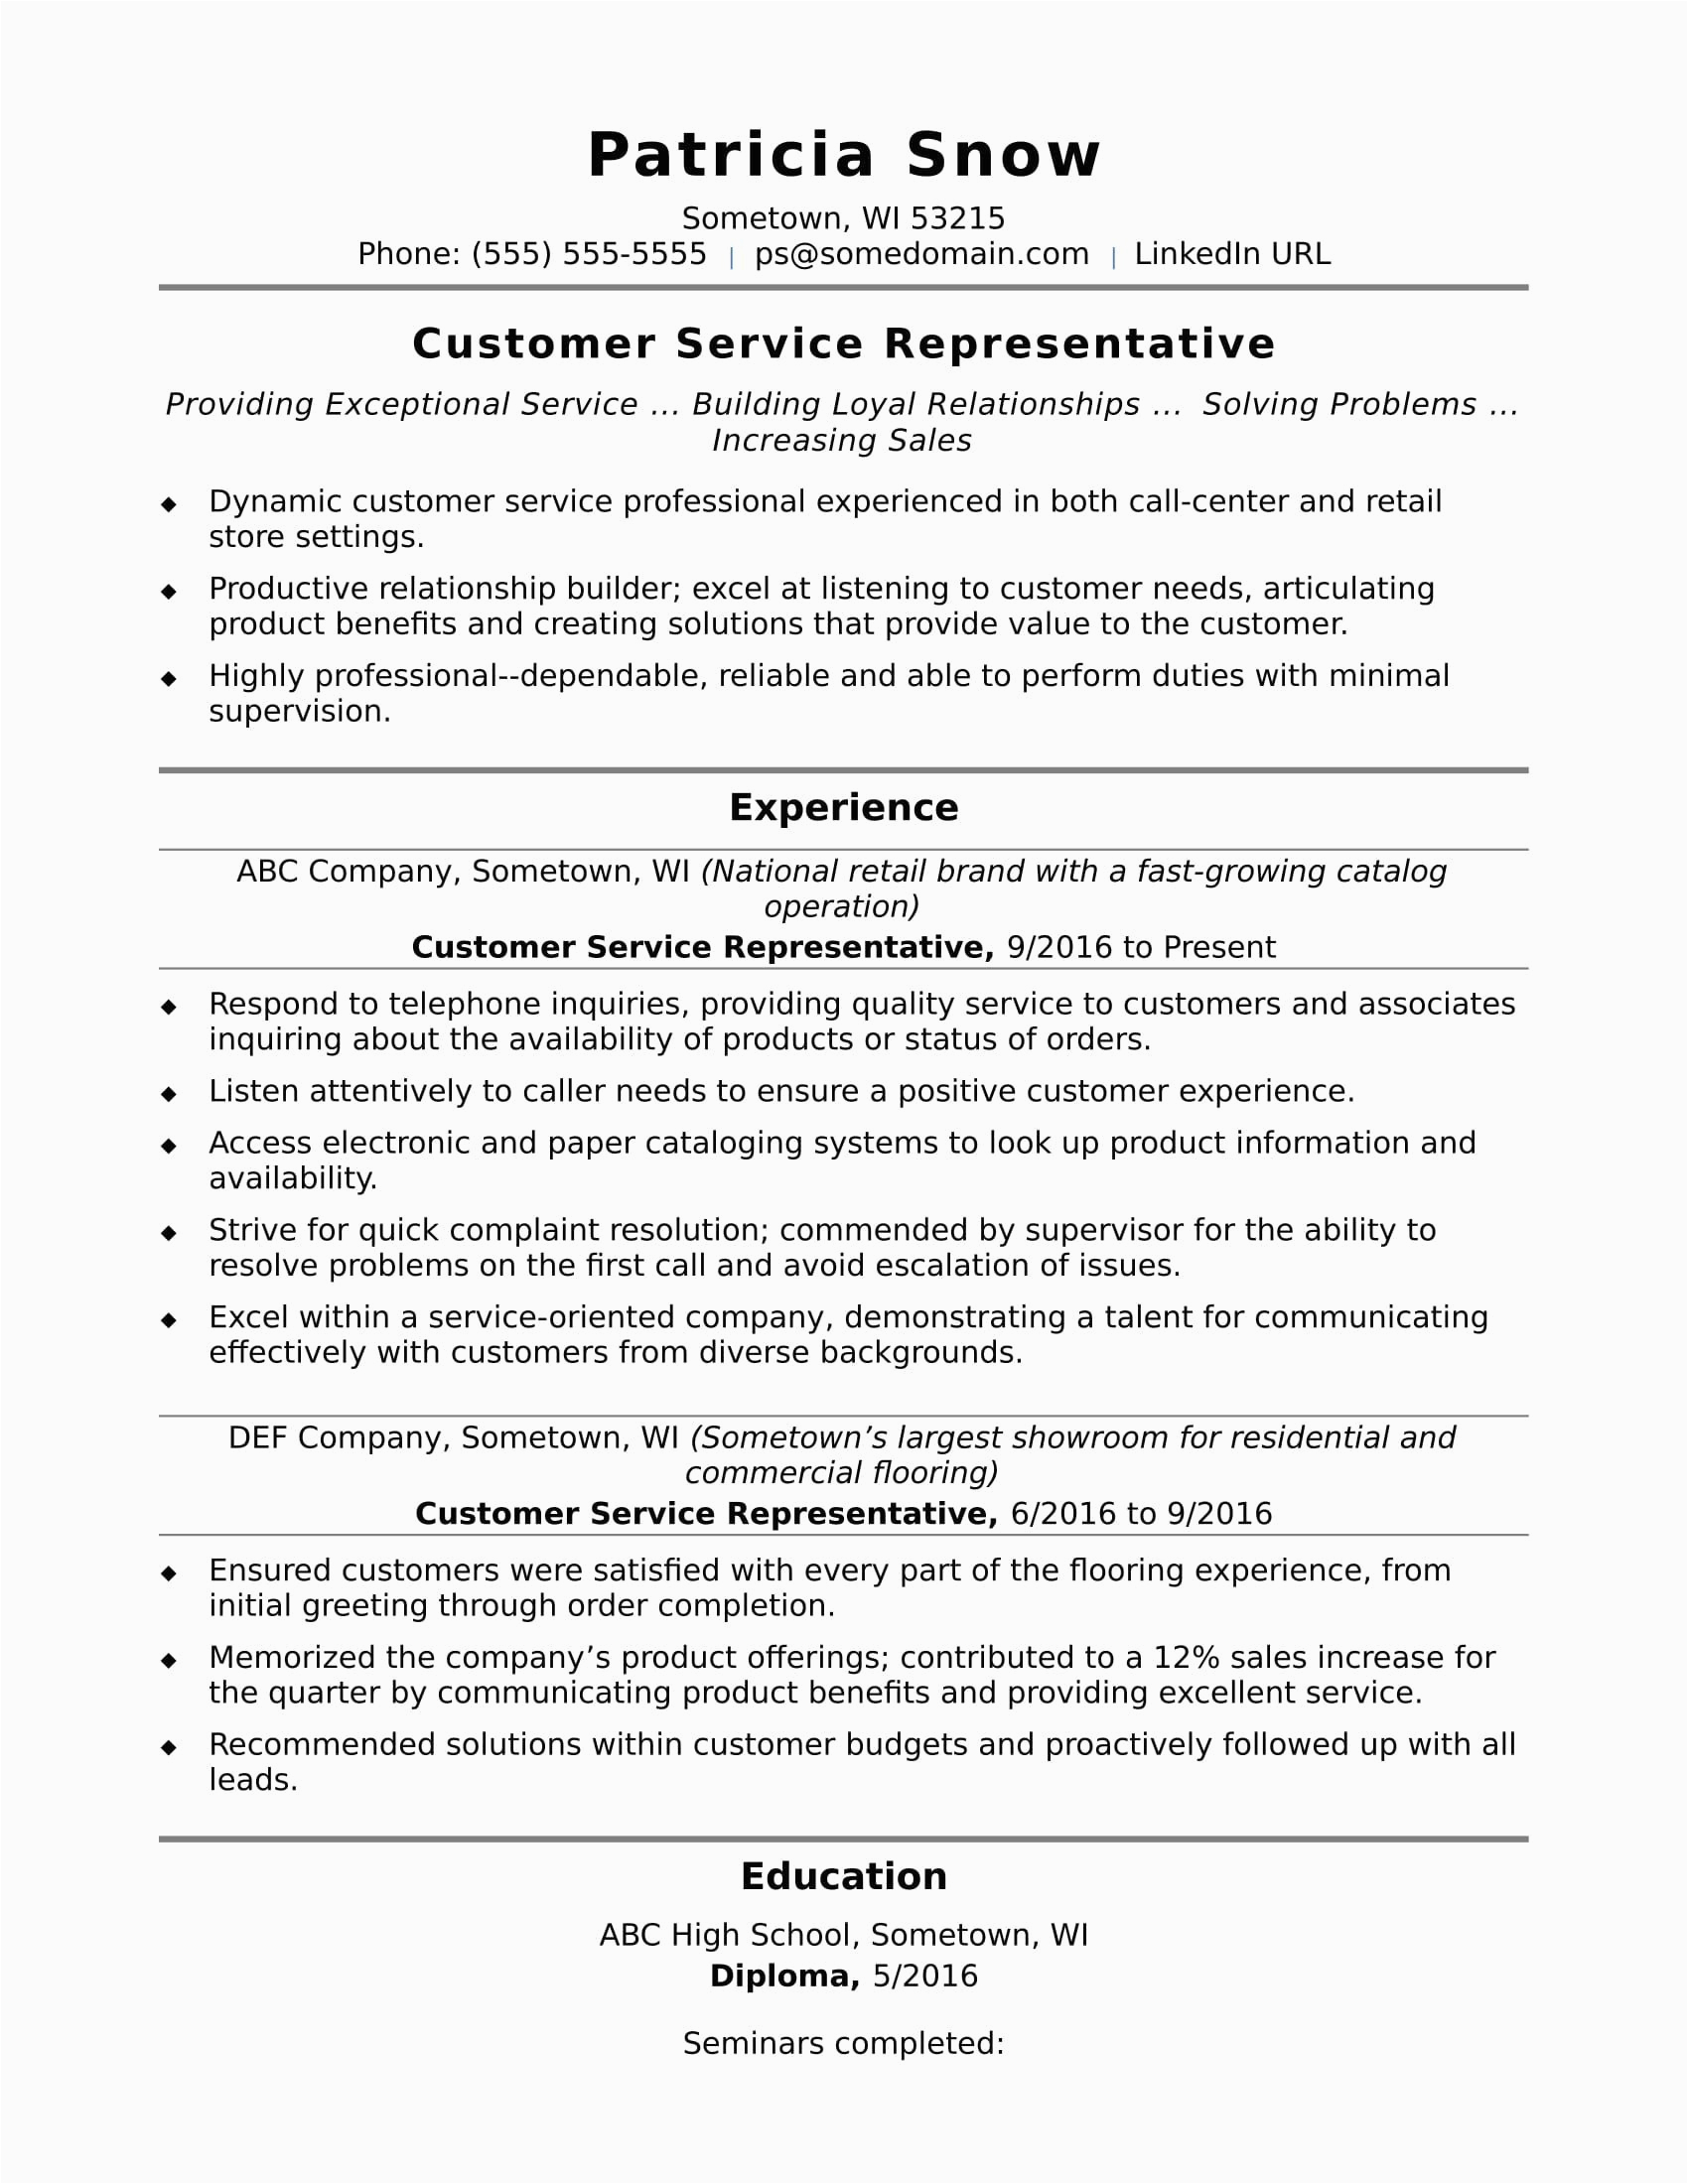 Sample Resumes for Entry Customer Service Jobs Entry Level Customer Service Resume Sample